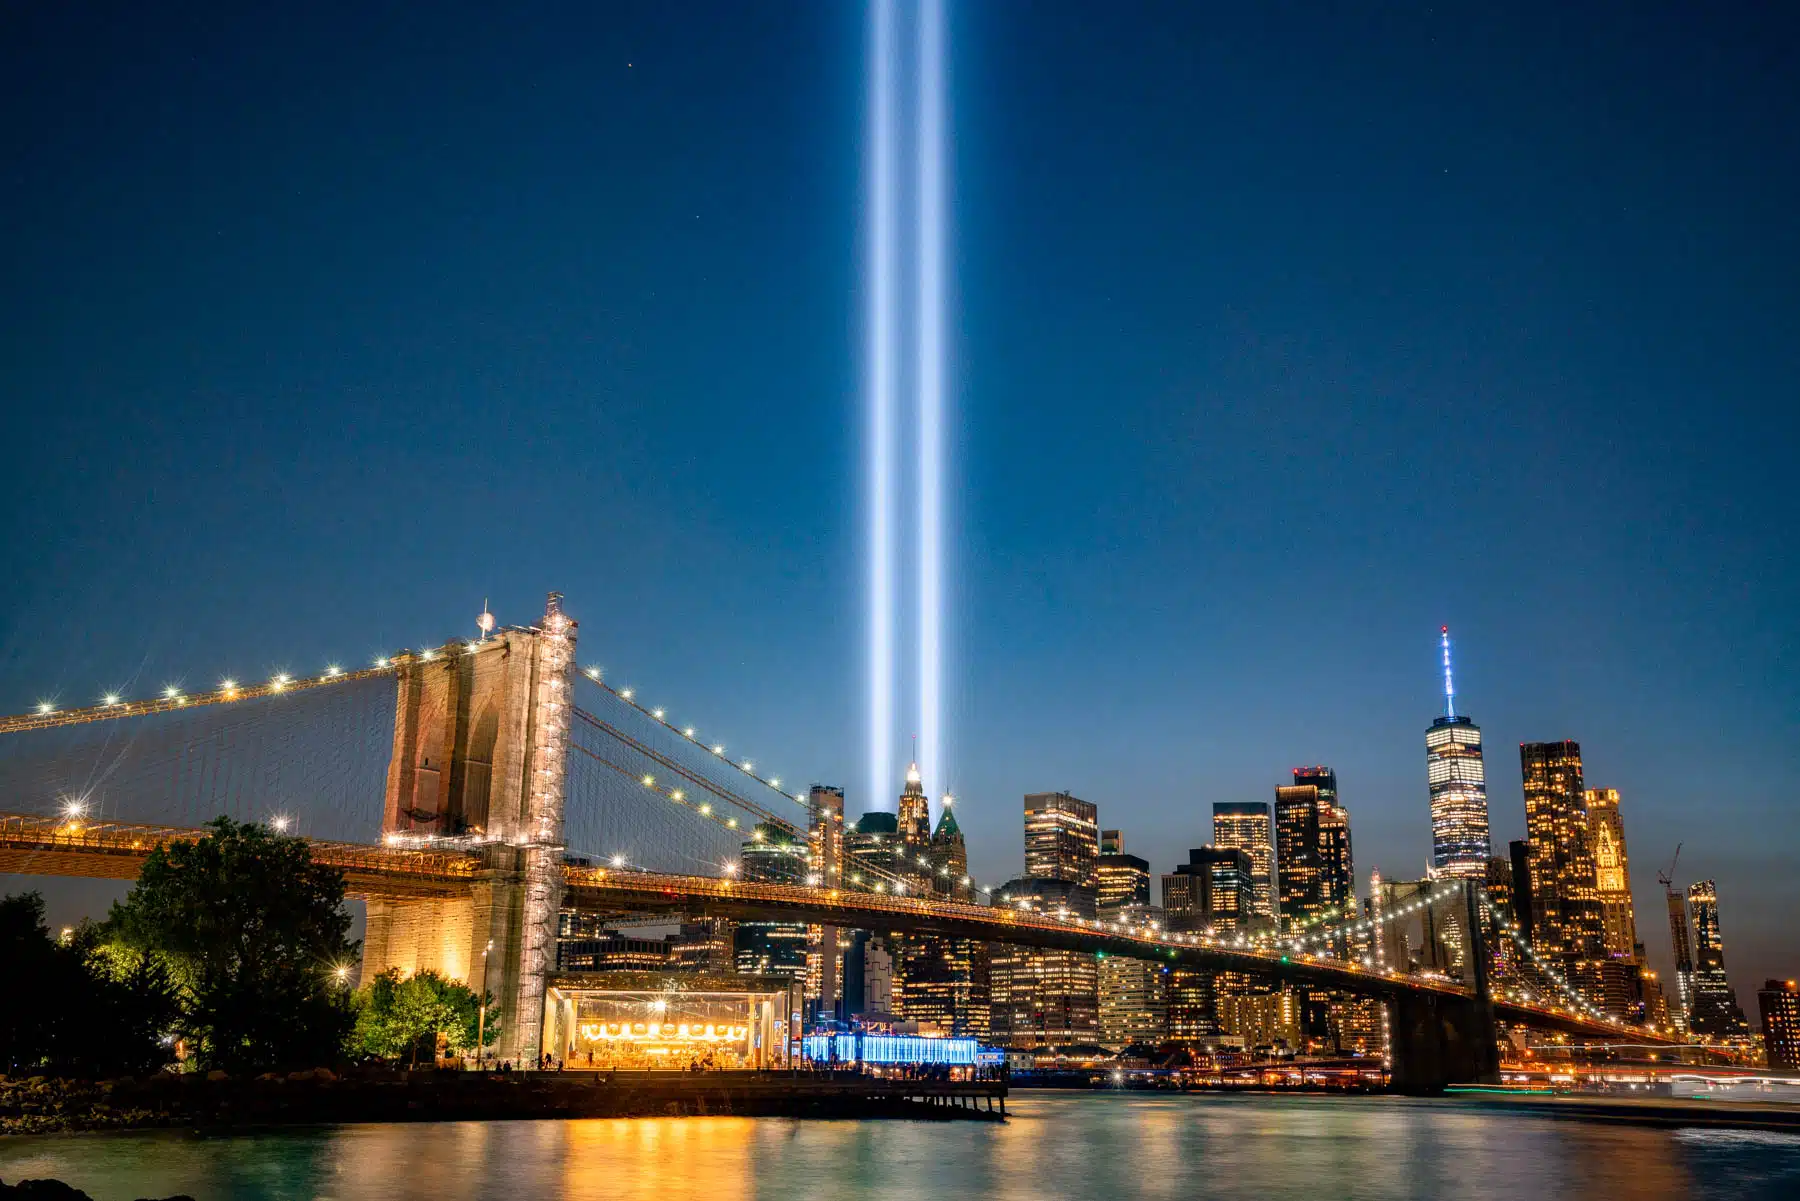 view of 9/11 Lights from DUMBO, crossing the Brooklyn Bridge at Night